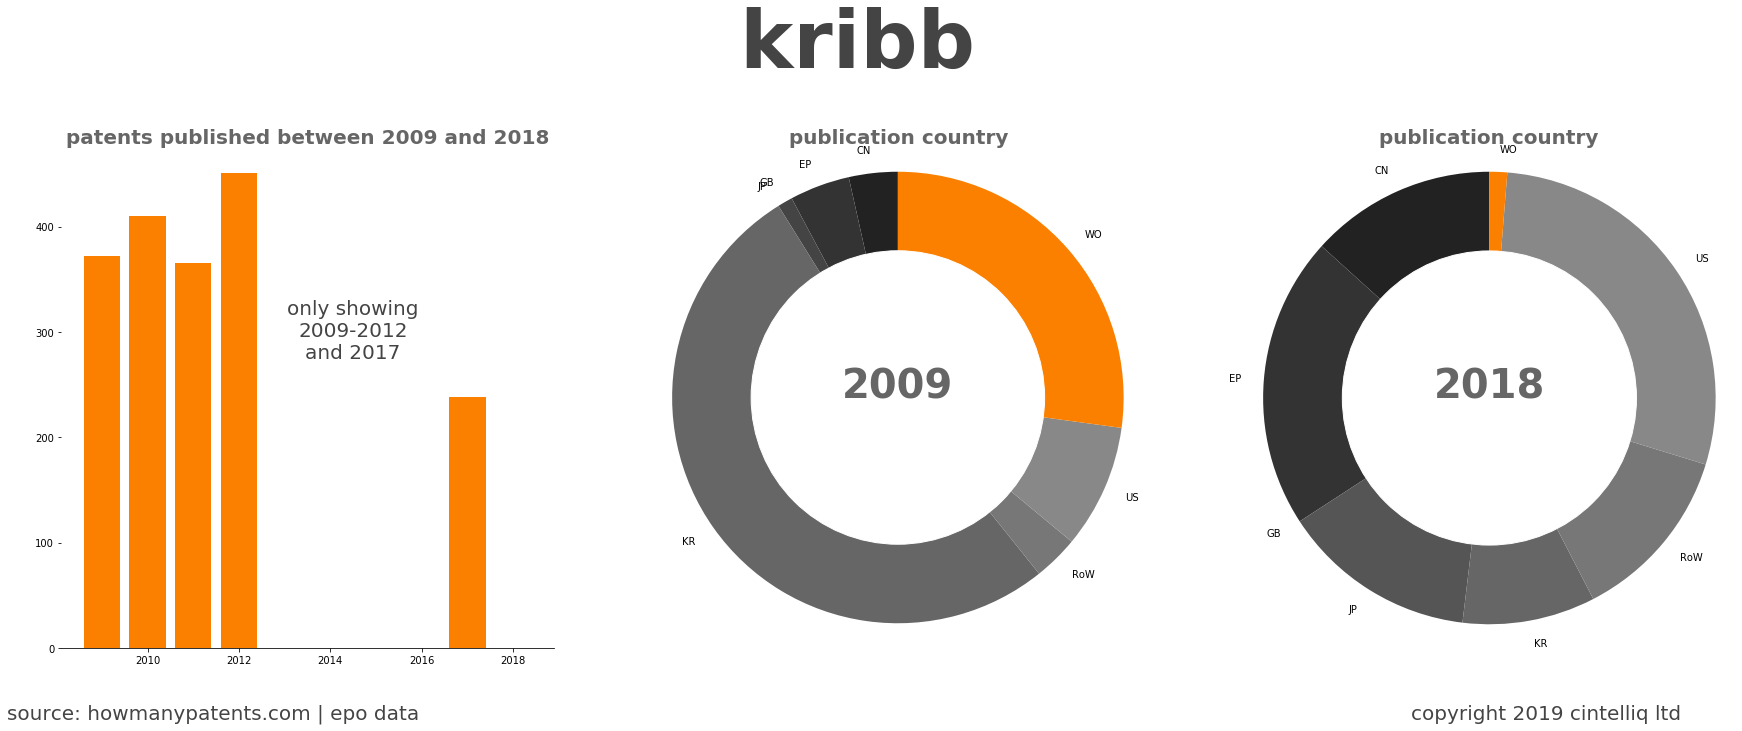 summary of patents for Kribb 